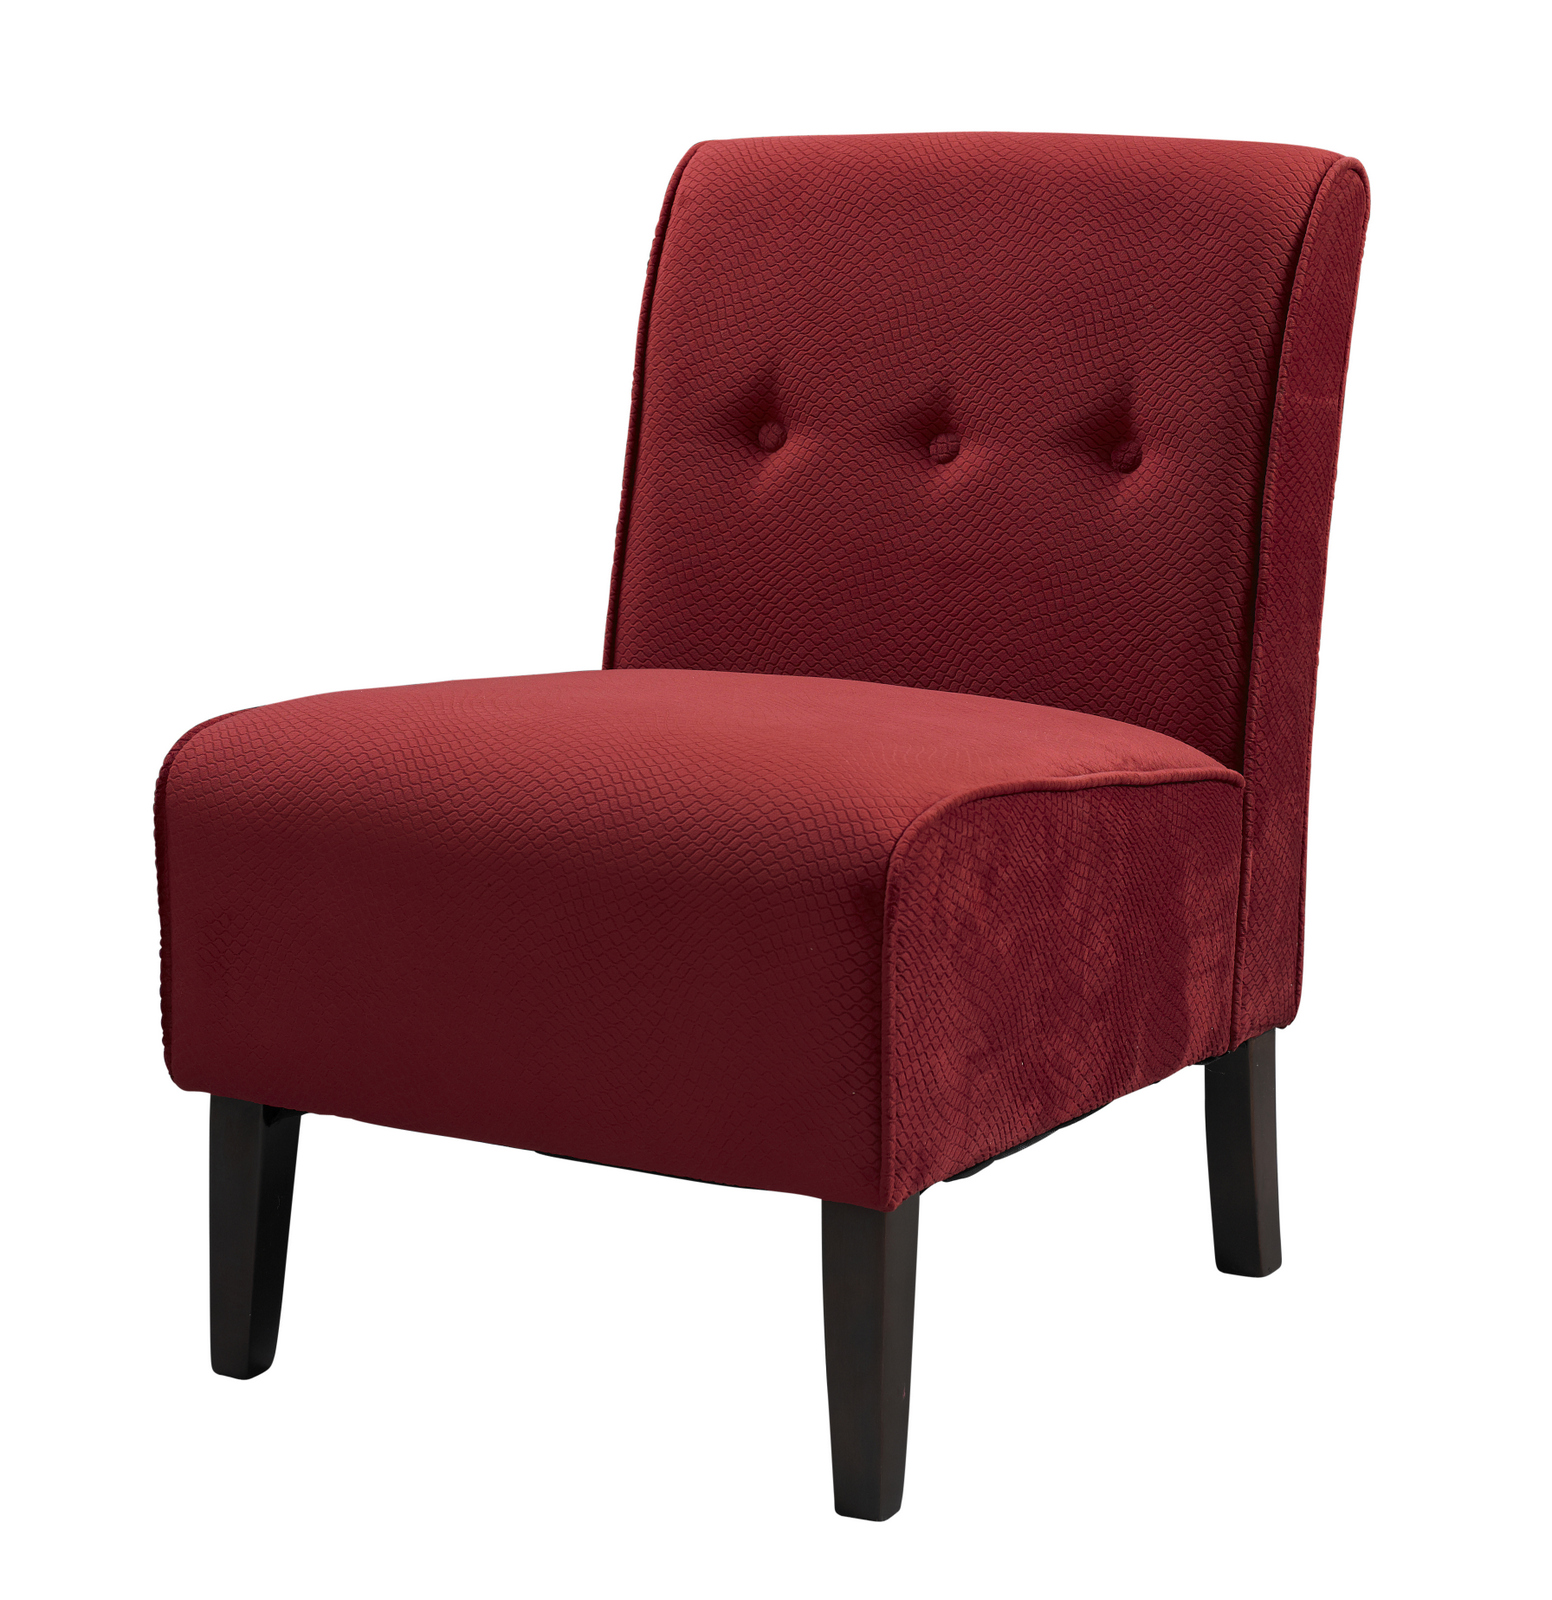 Furnituremaxx Coco Hardwood Frame & Soft Upholstered Accent Chair - Red